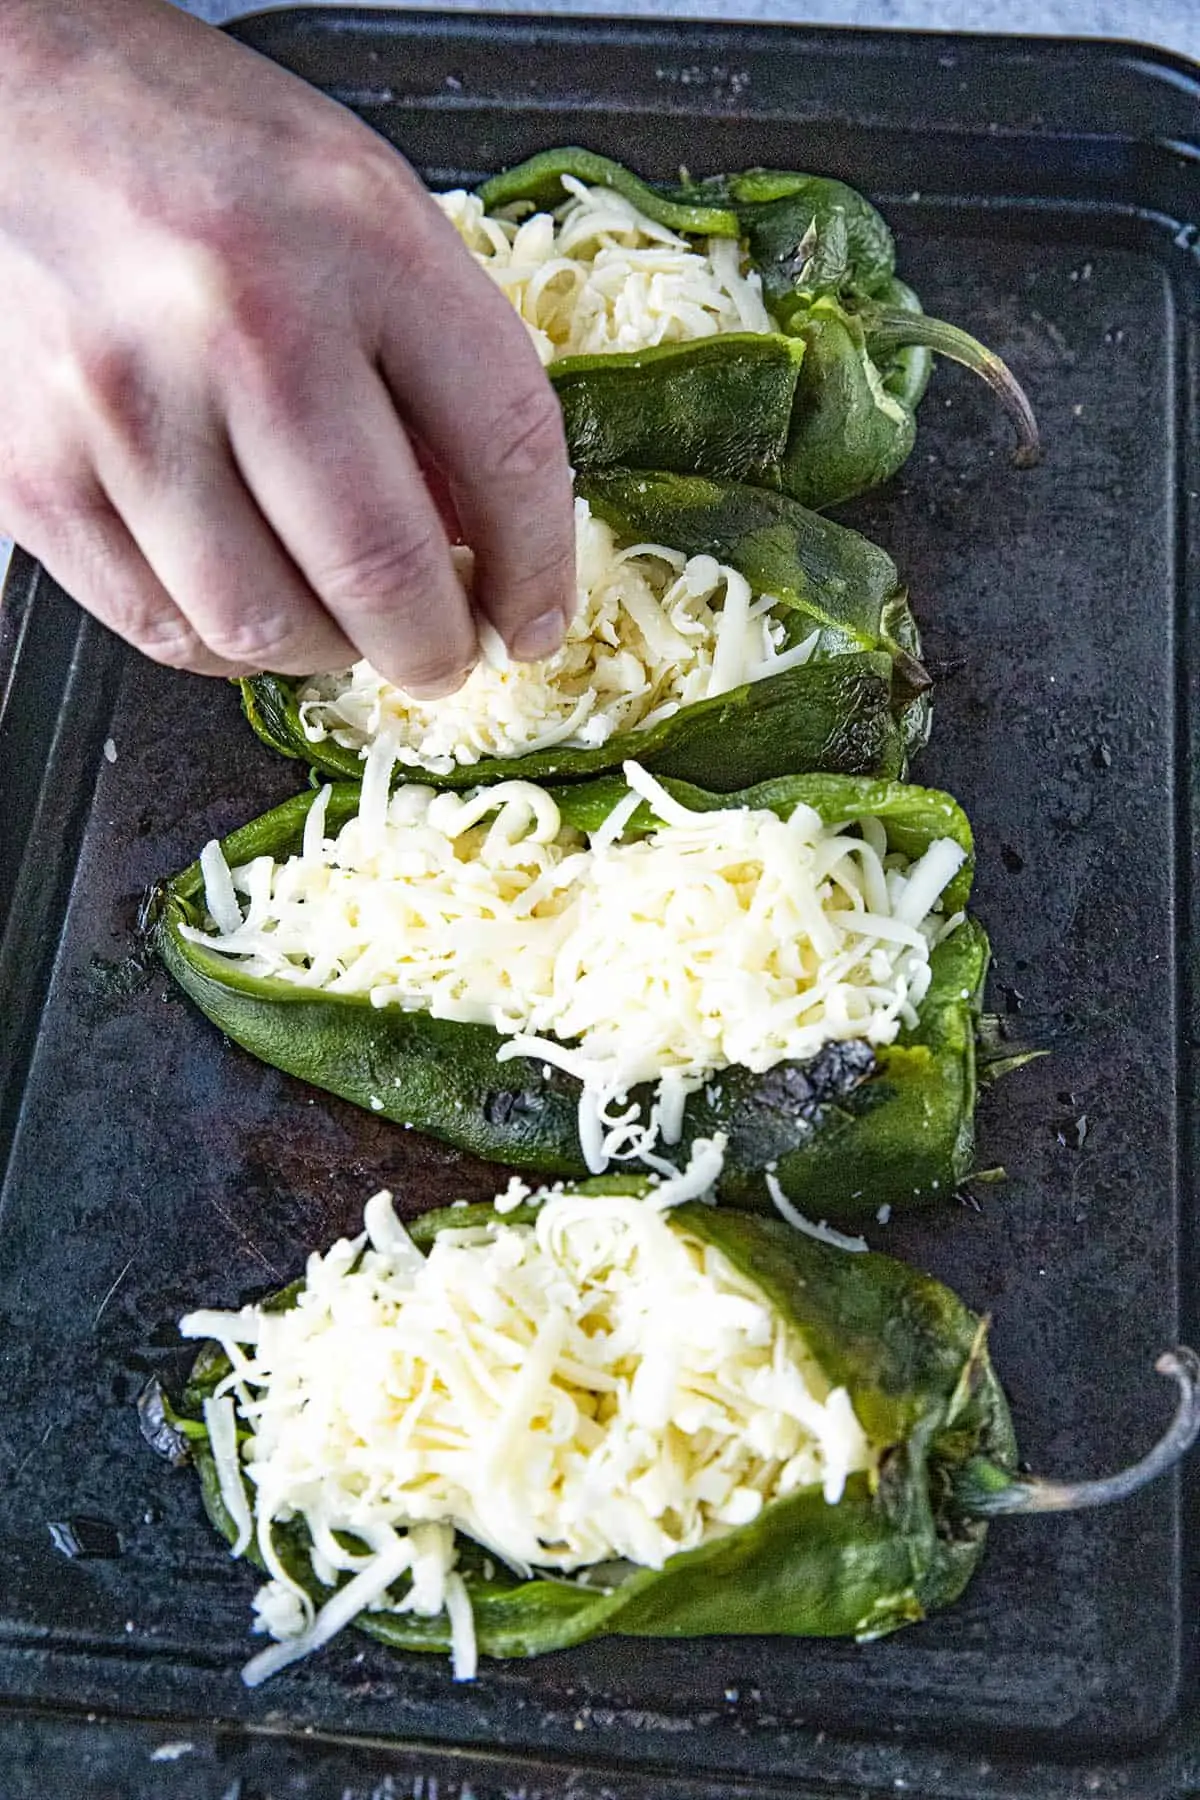 Stuffing roasted poblano peppers with cheese